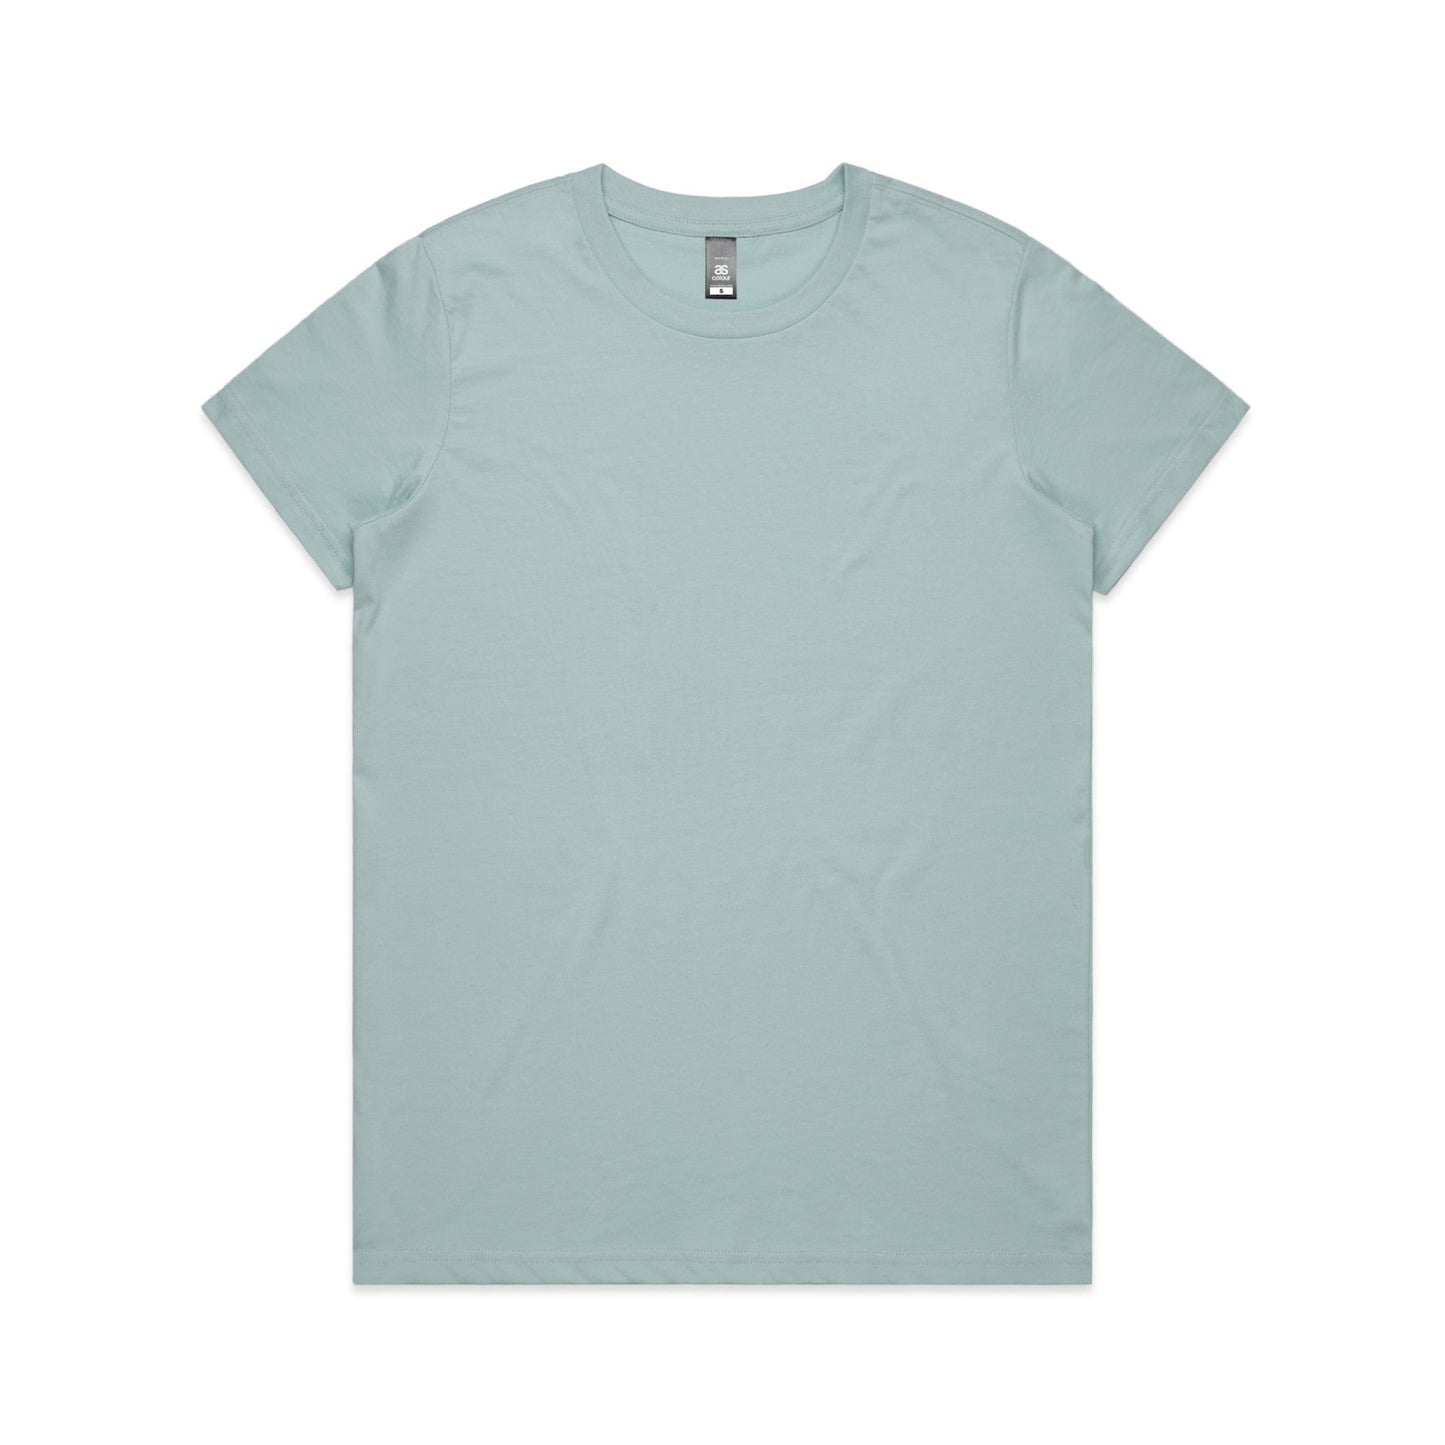 How You Doin? Relaxed Maple T-Shirt